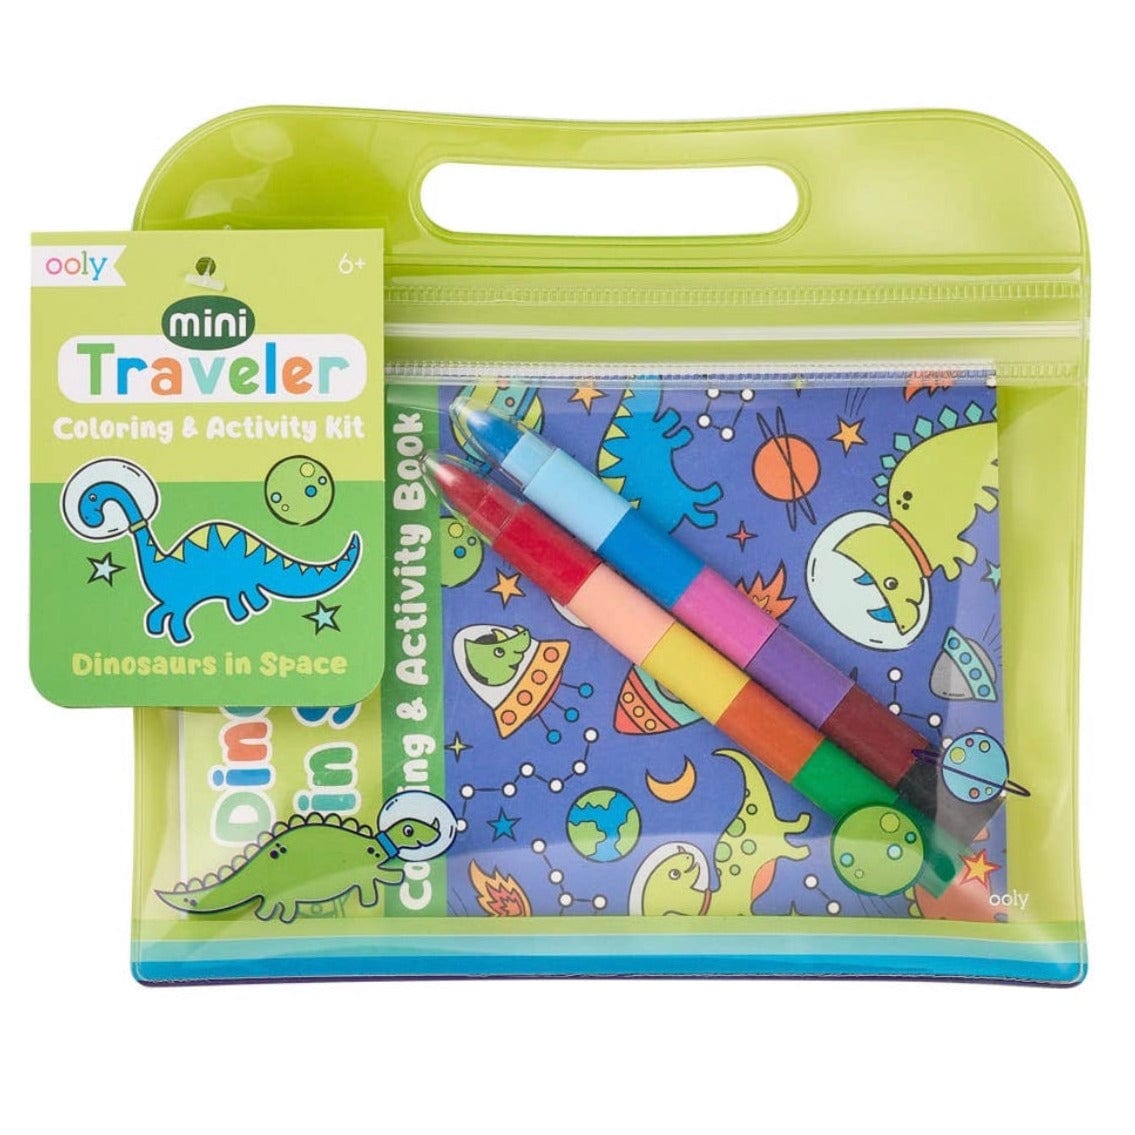 ooly Mini Traveler & Activity Kit: Dinosaurs in Space